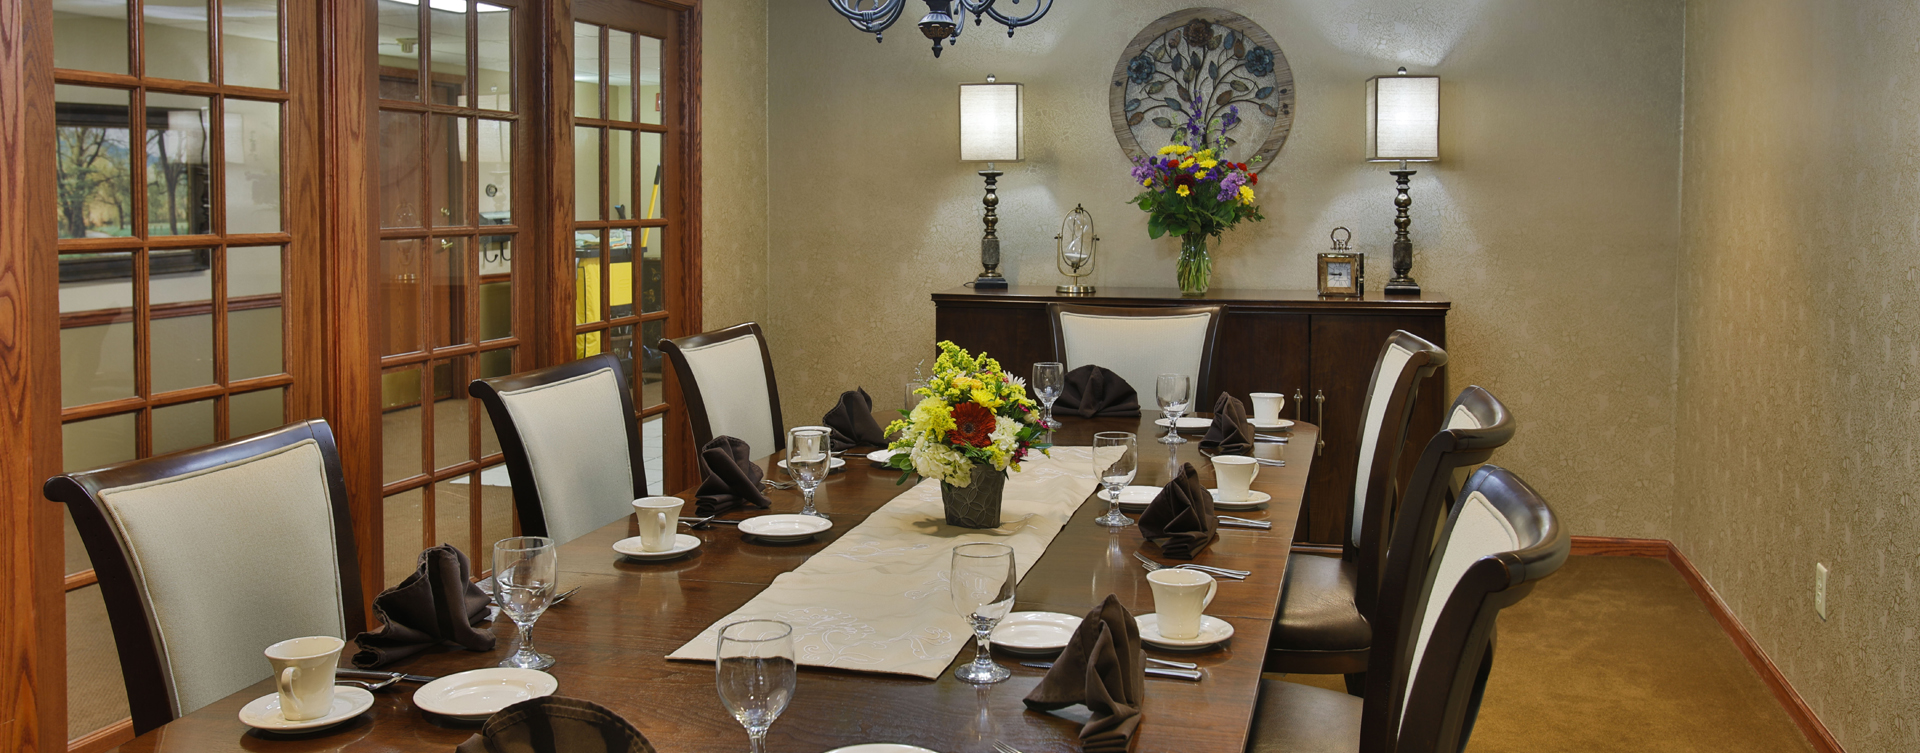 Food is best when shared with family and friends in the private dining room at Bickford of Bloomington